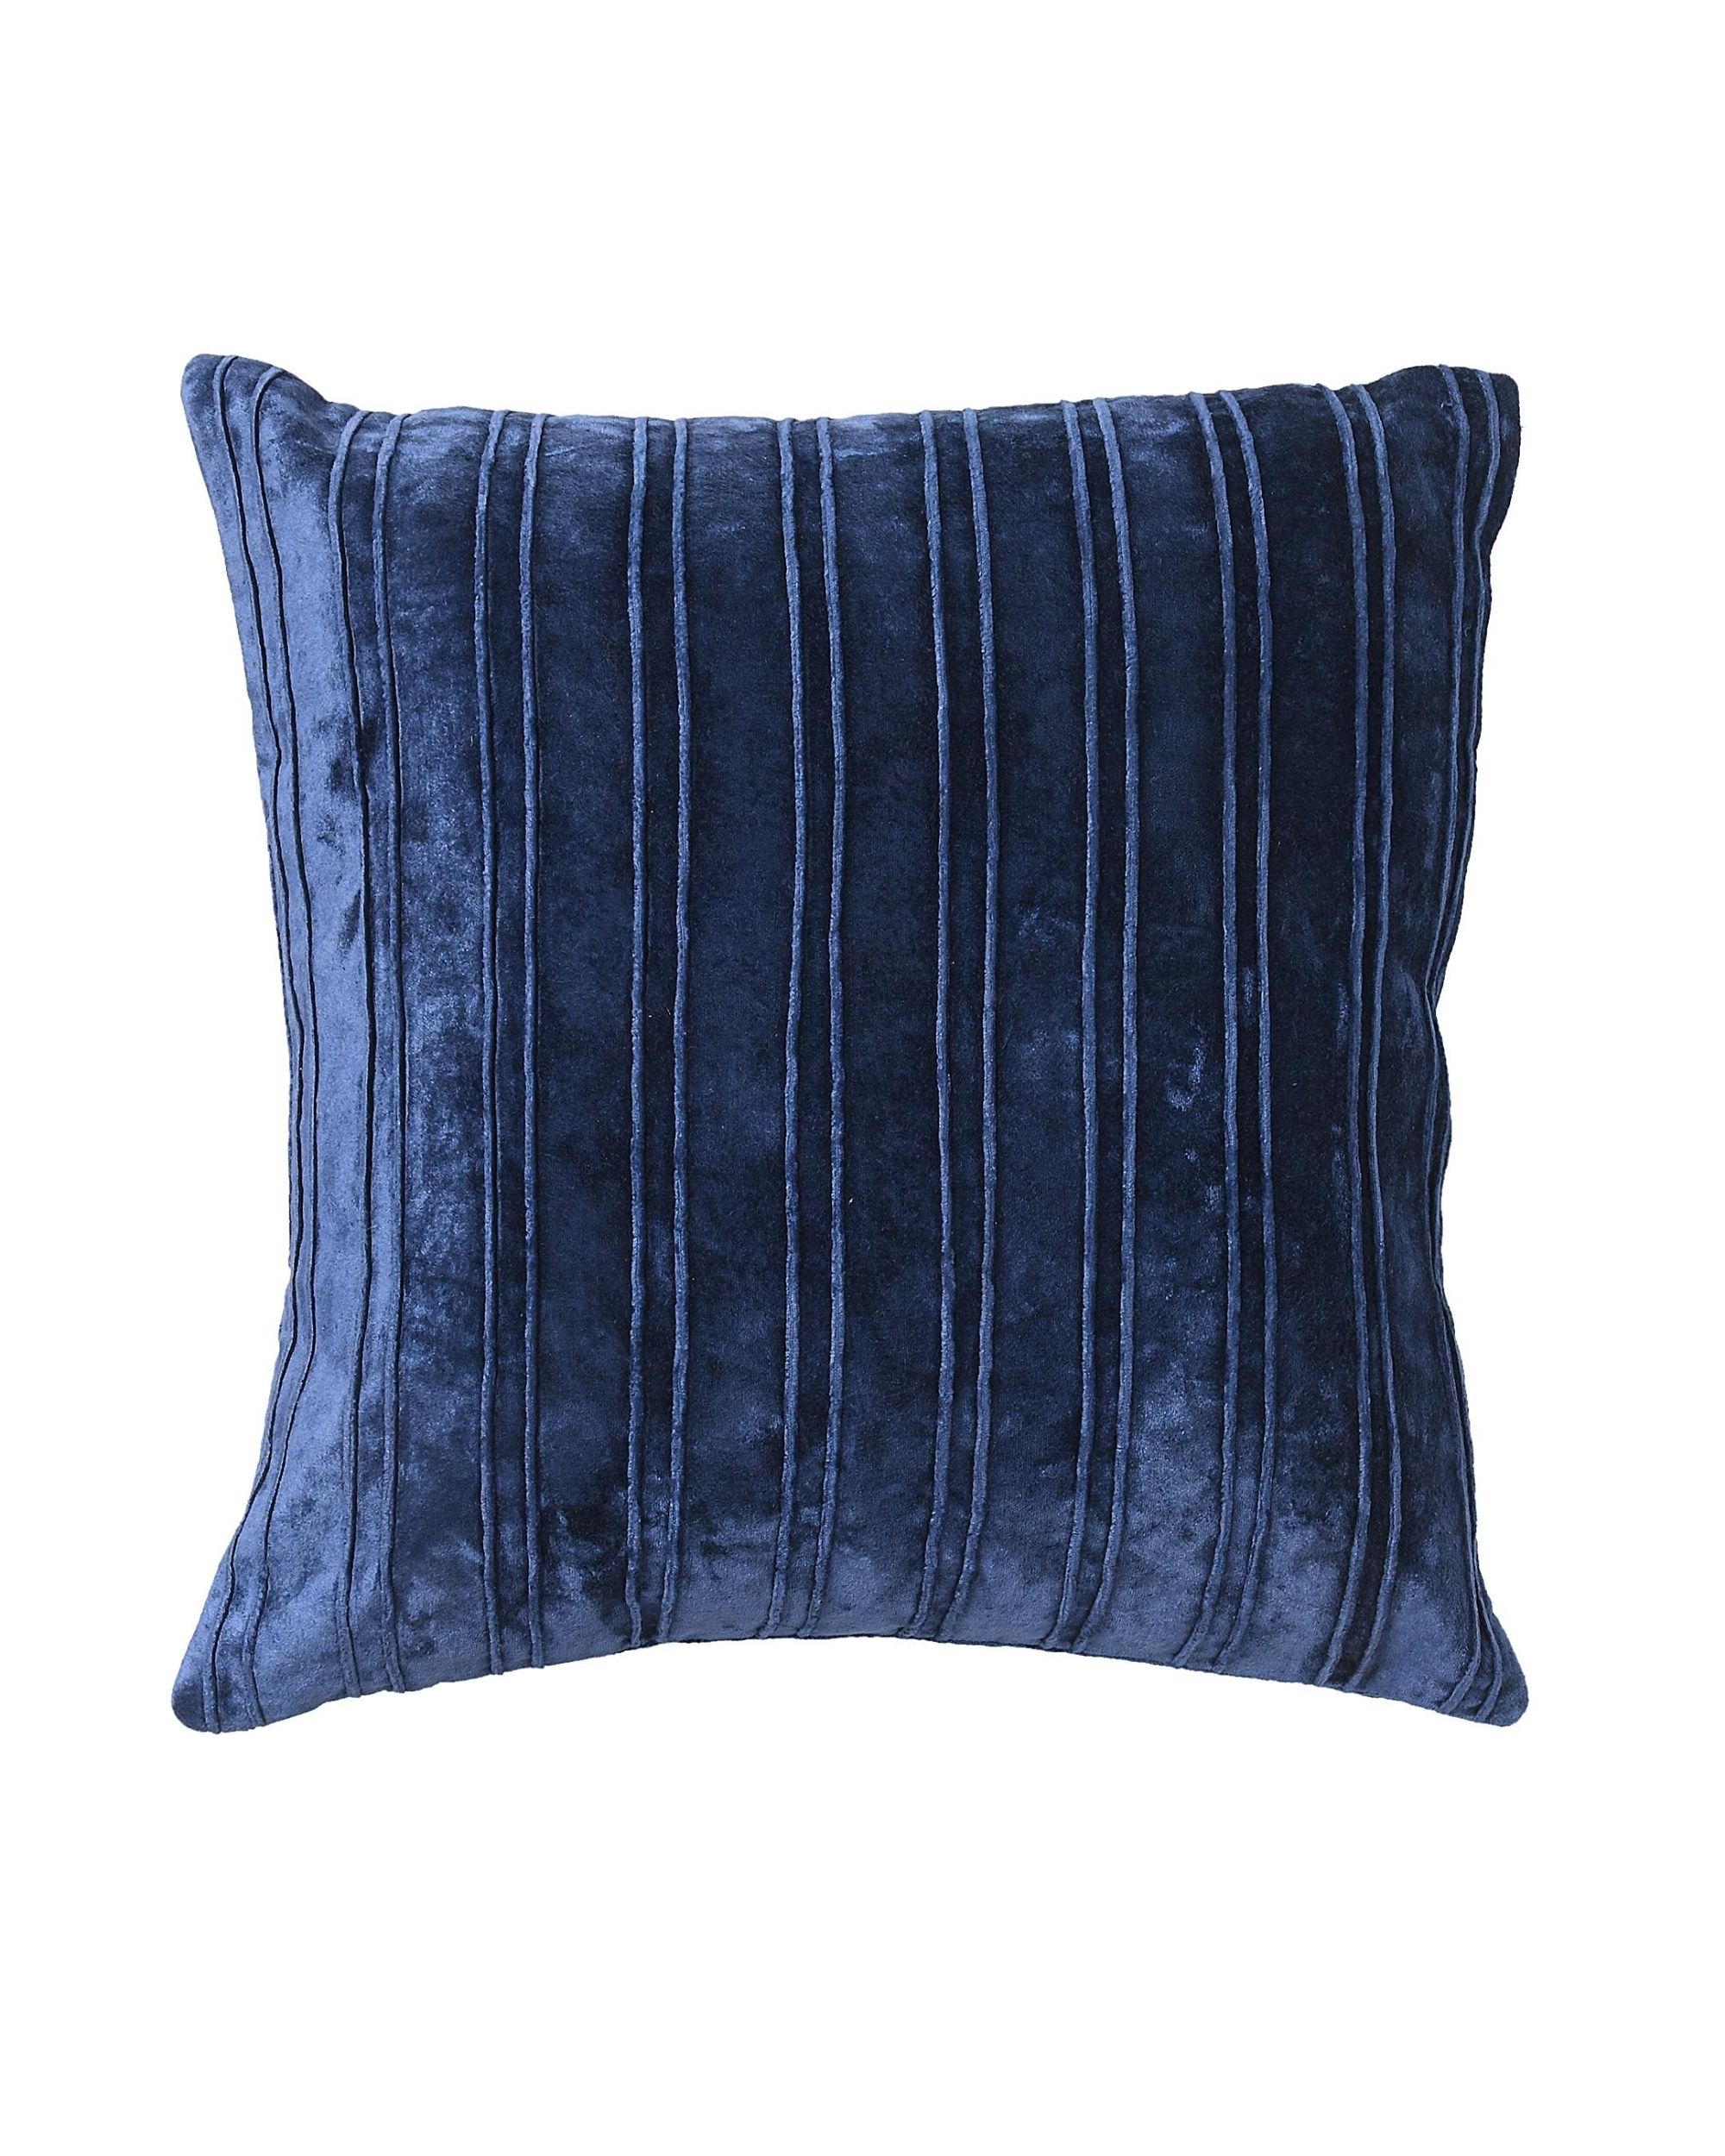 Viscose velvet double needle work cushion cover by Amoliconcepts | The ...